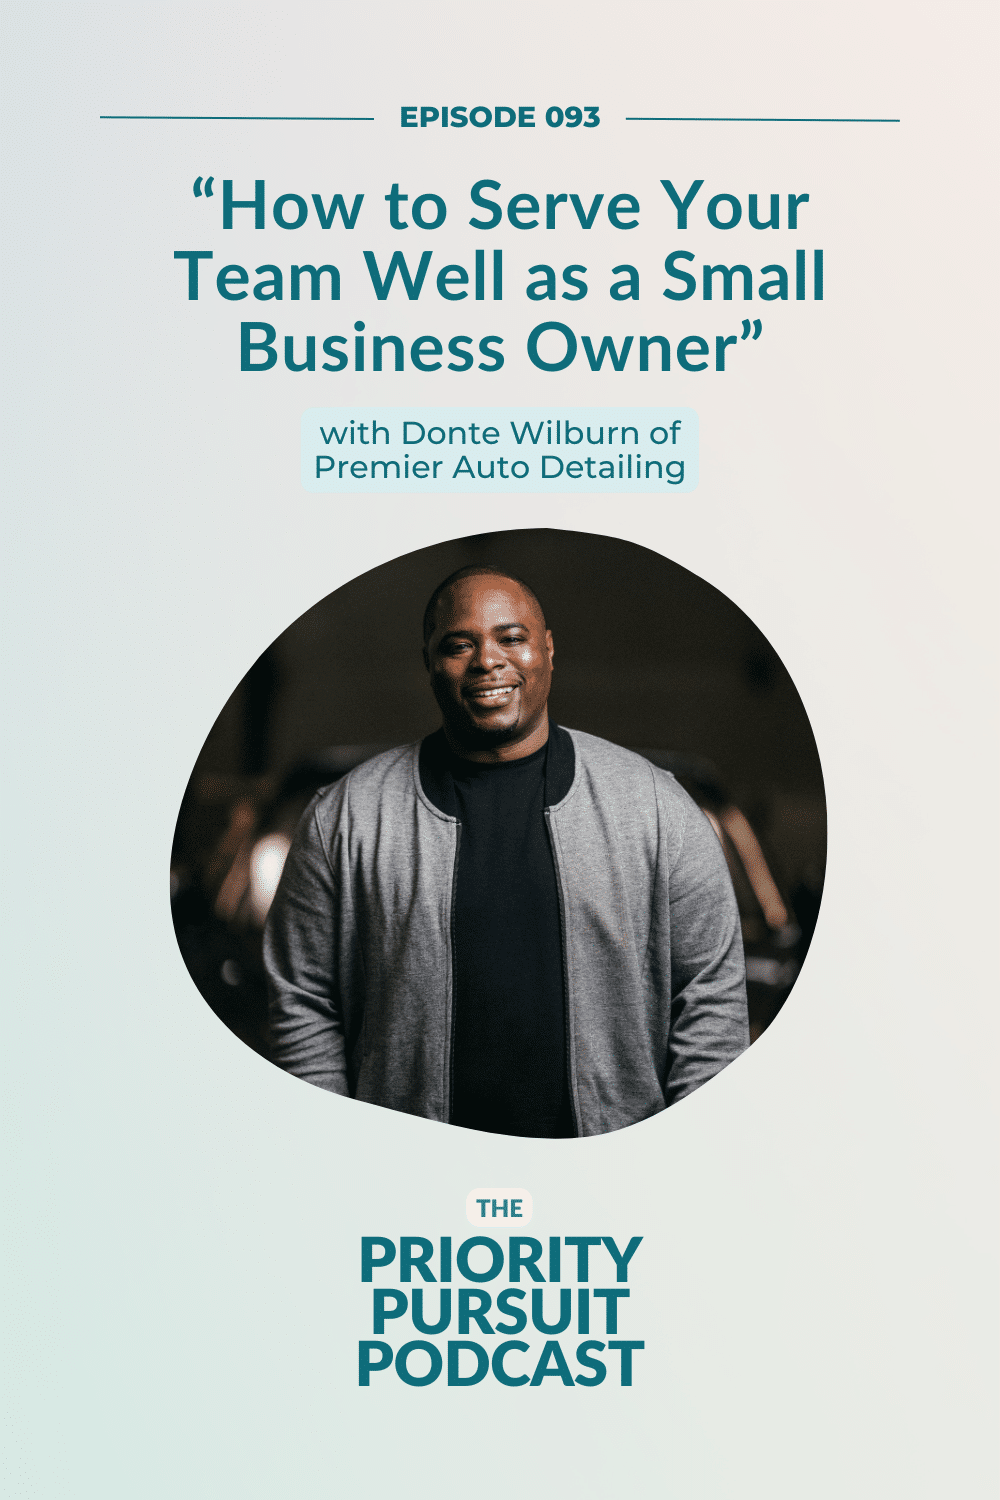 How to Serve Your Team Well as a Business Owner with Donte Wilburn